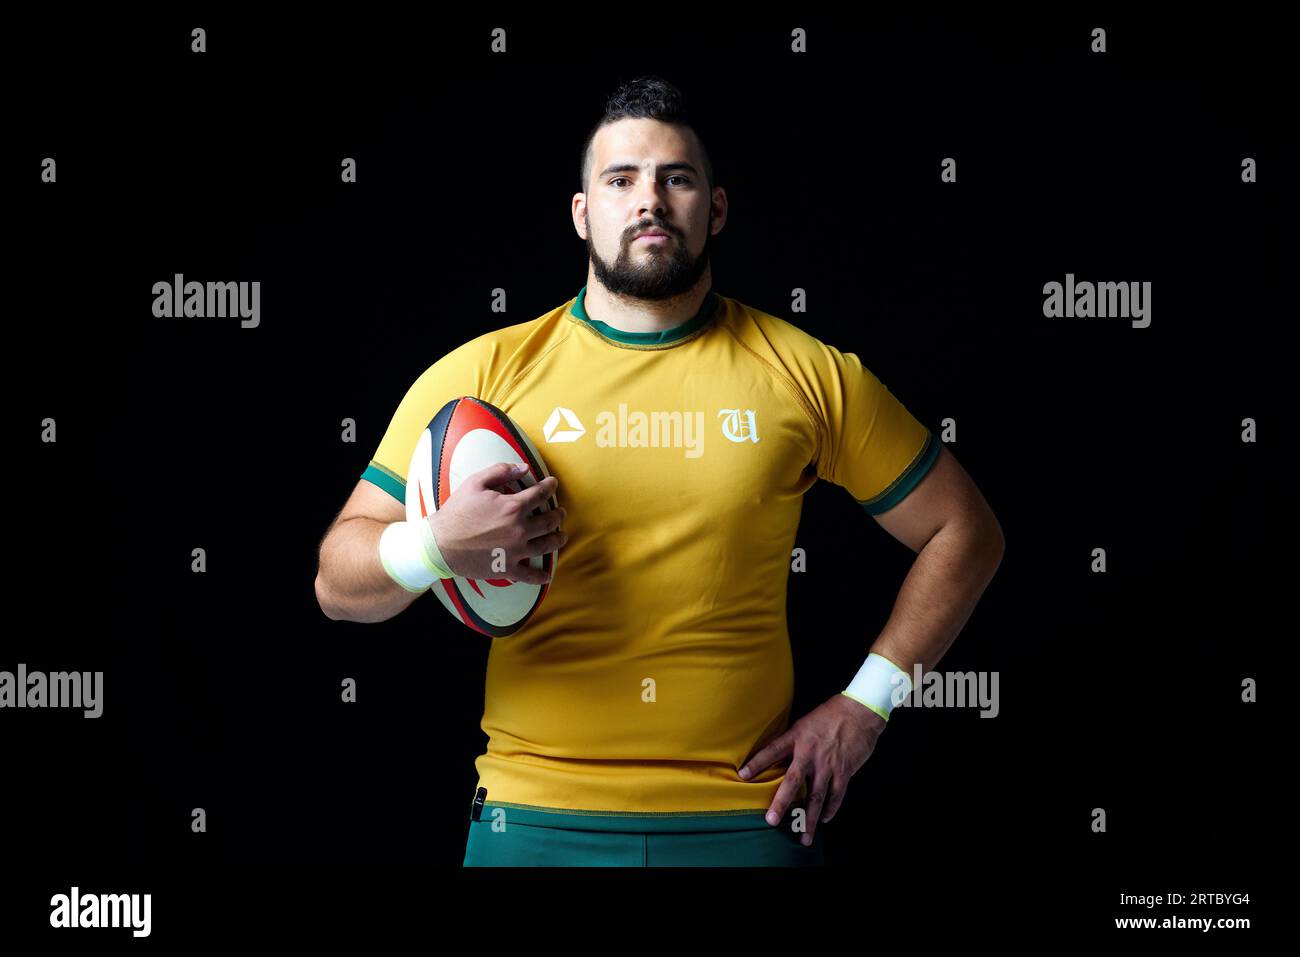 Rugby-Athlet Stockfoto